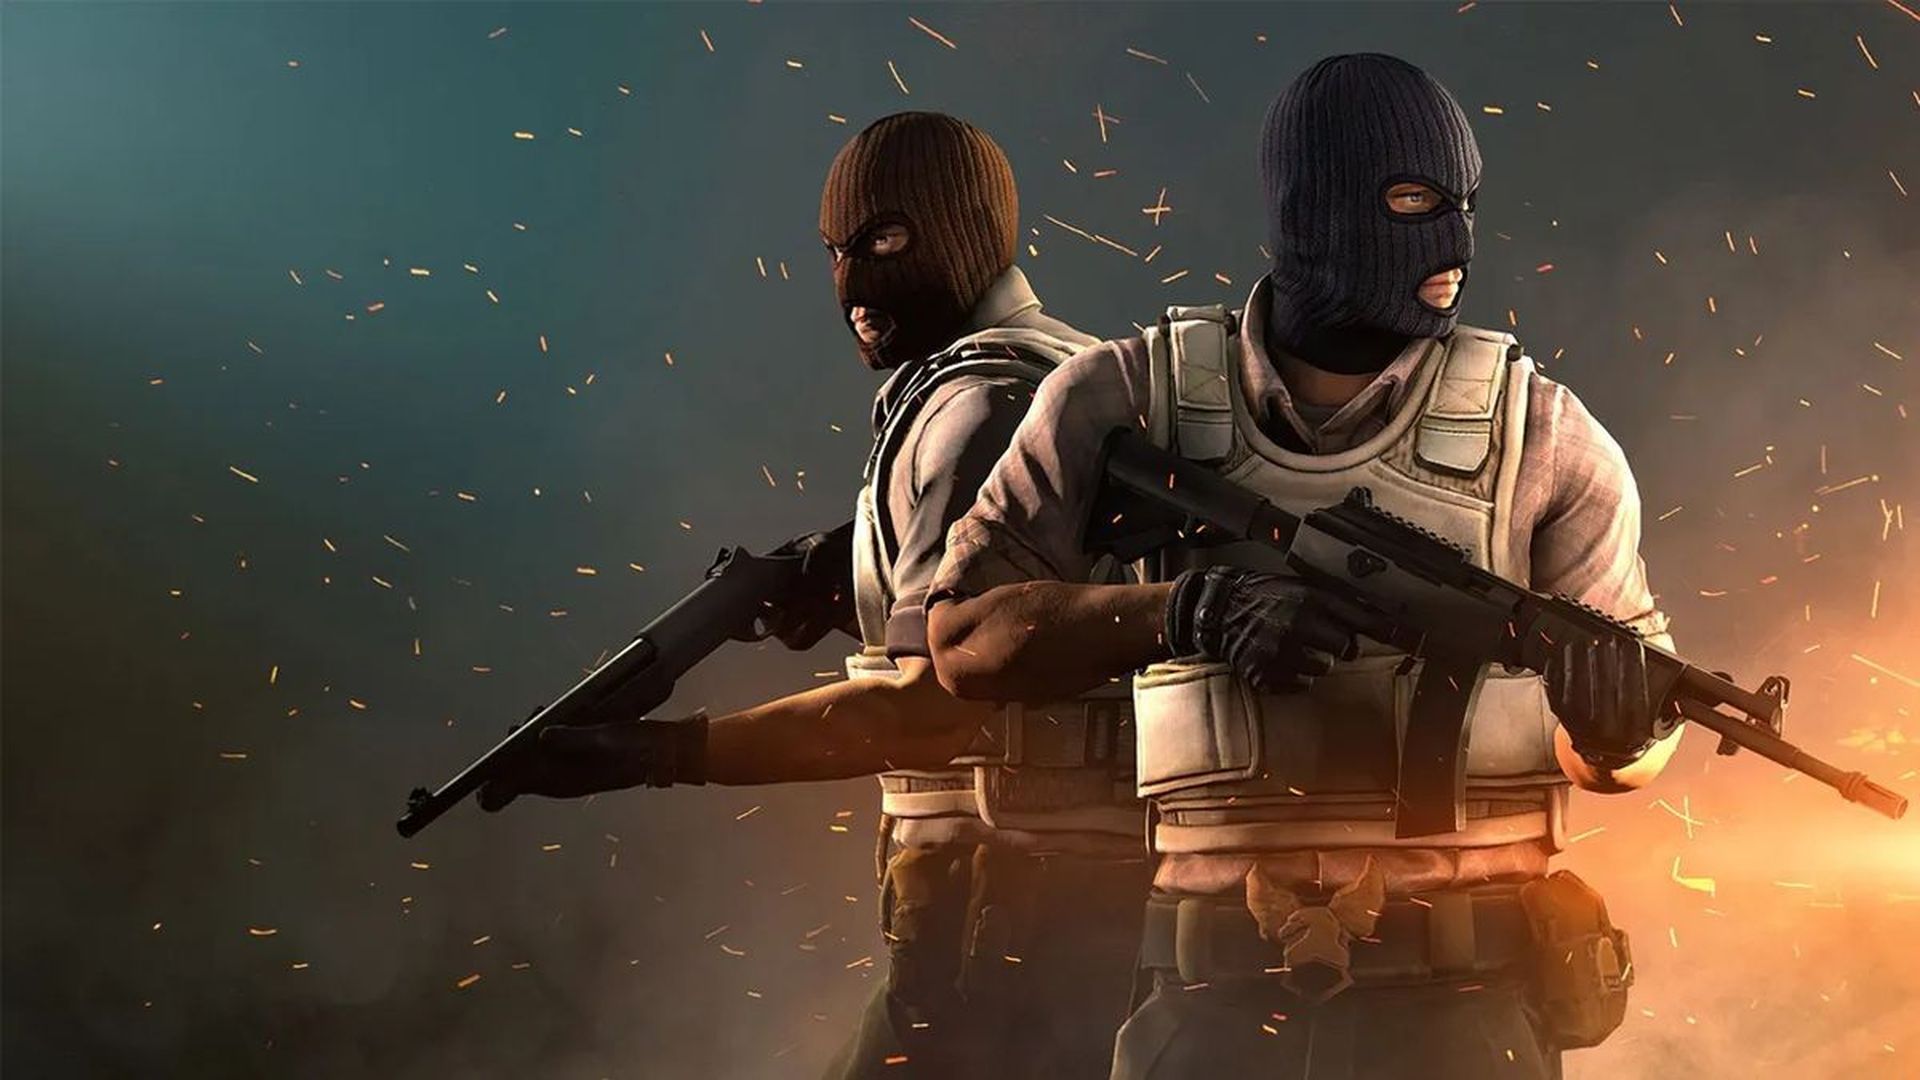 The so-called "Counter Strike 2 beta" might be on its way